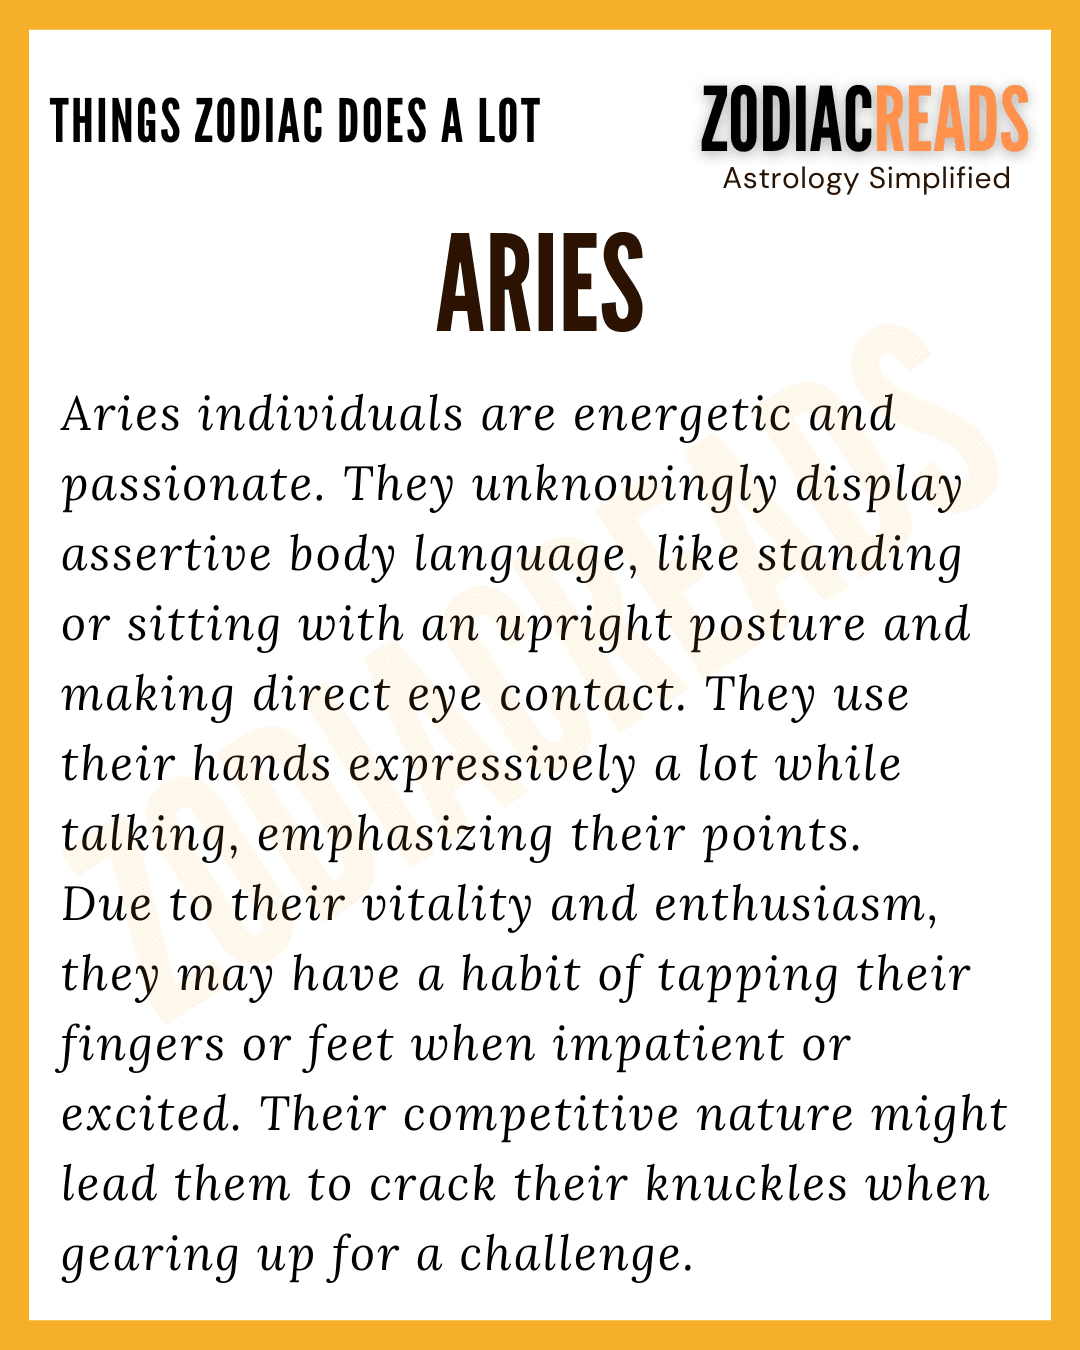 Aries Things That Zodiac Signs Tend To Do A Lot